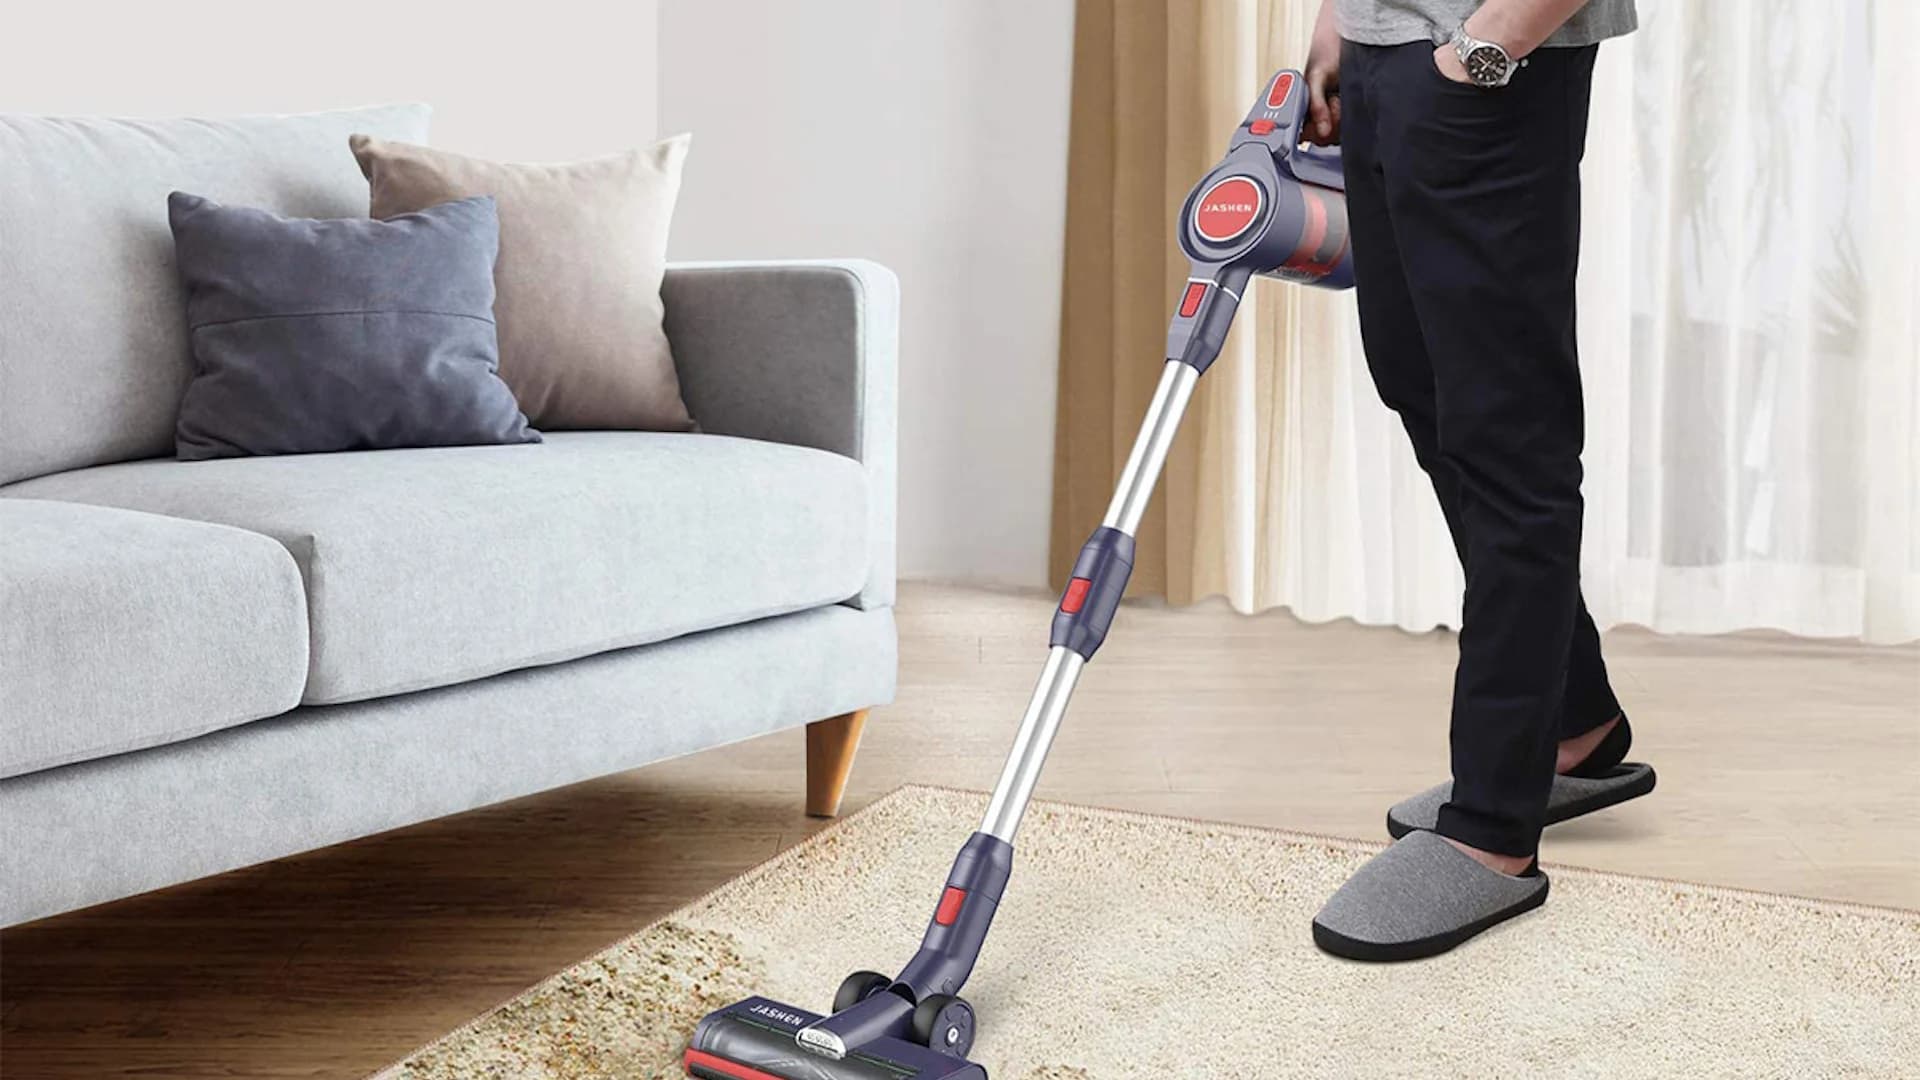 Tackle Spring cleaning with this Dyson vacuum alternative, on sale